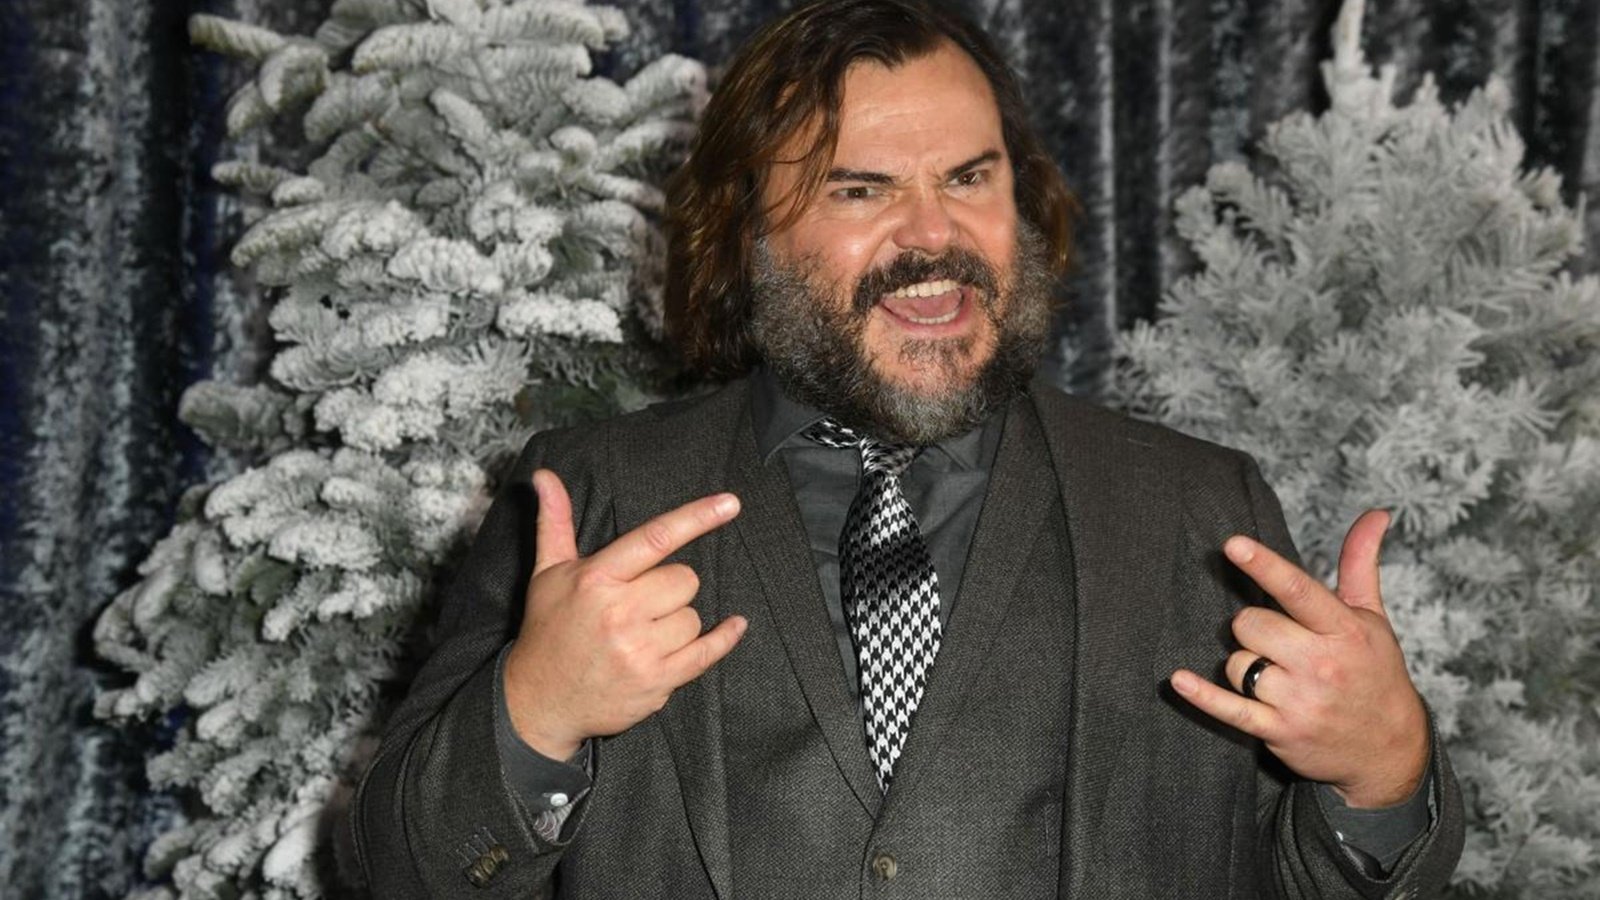 Jack Black will produce the short Gianna by Rivkah Reyes, his co-star in School of Rock